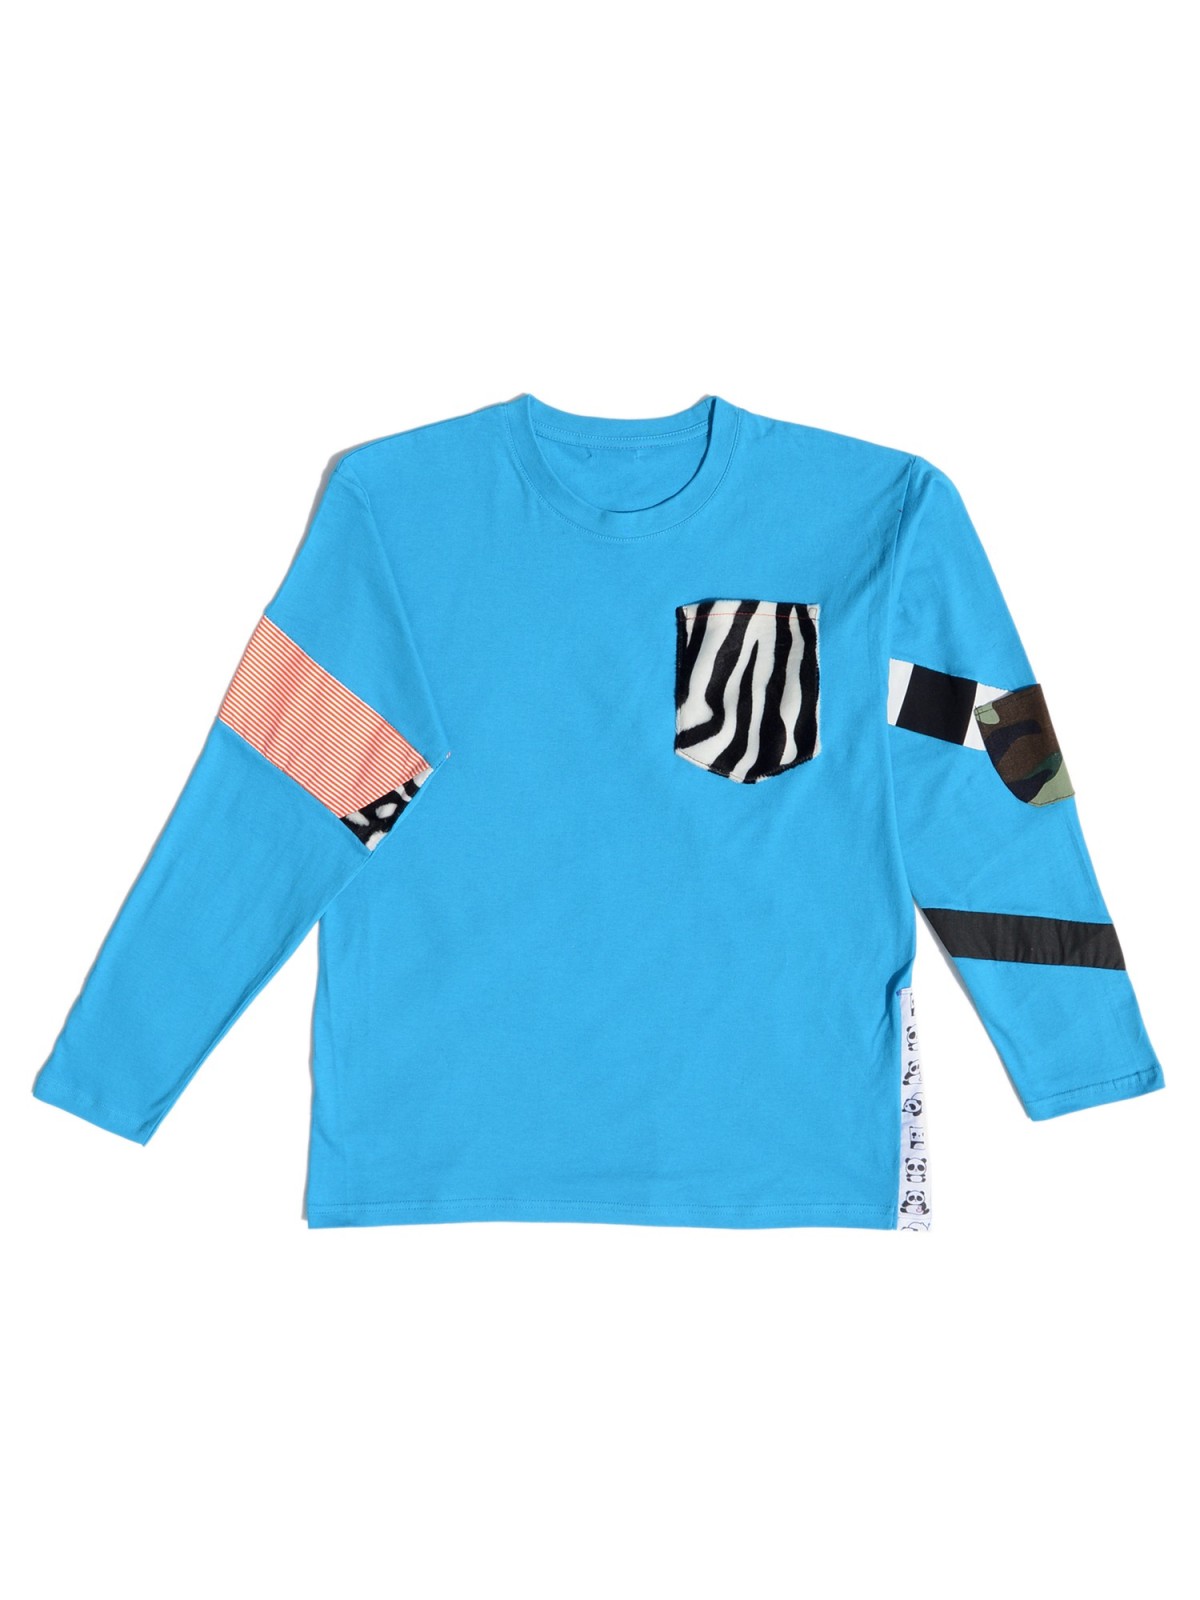 Turquoise T-shirt with a printed inserts and pocket